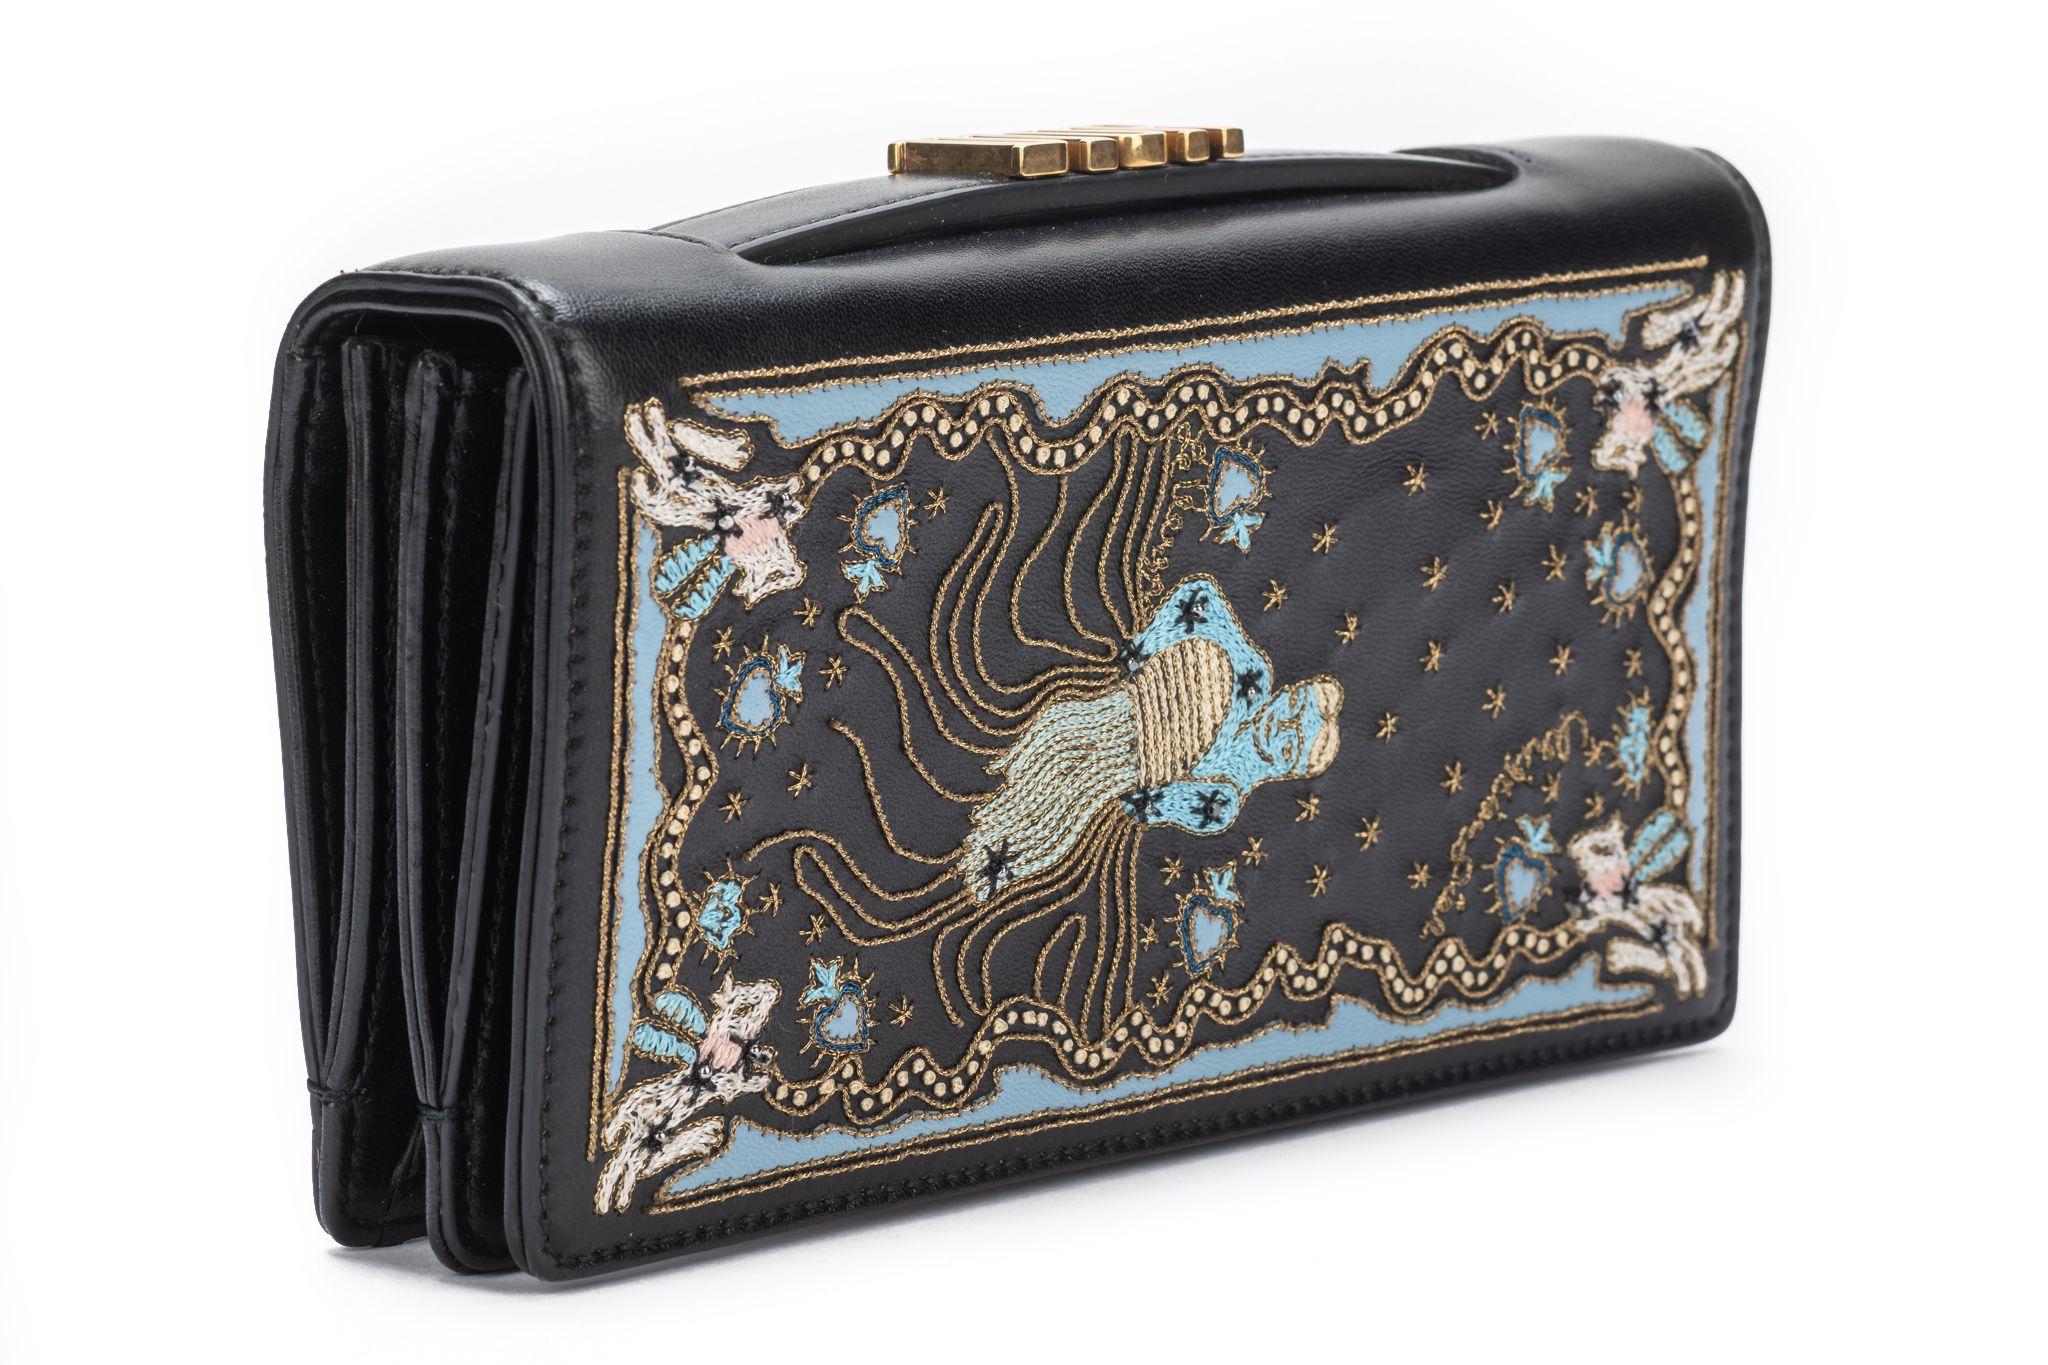 Christian Dior Tarot Pouch with Embroidered Leather. It is from the brand's Spring/Summer 2017 Collection, the first collection from Maria Grazia Chiuri. The bag is new and comes with the booklet, card and original dustcover.